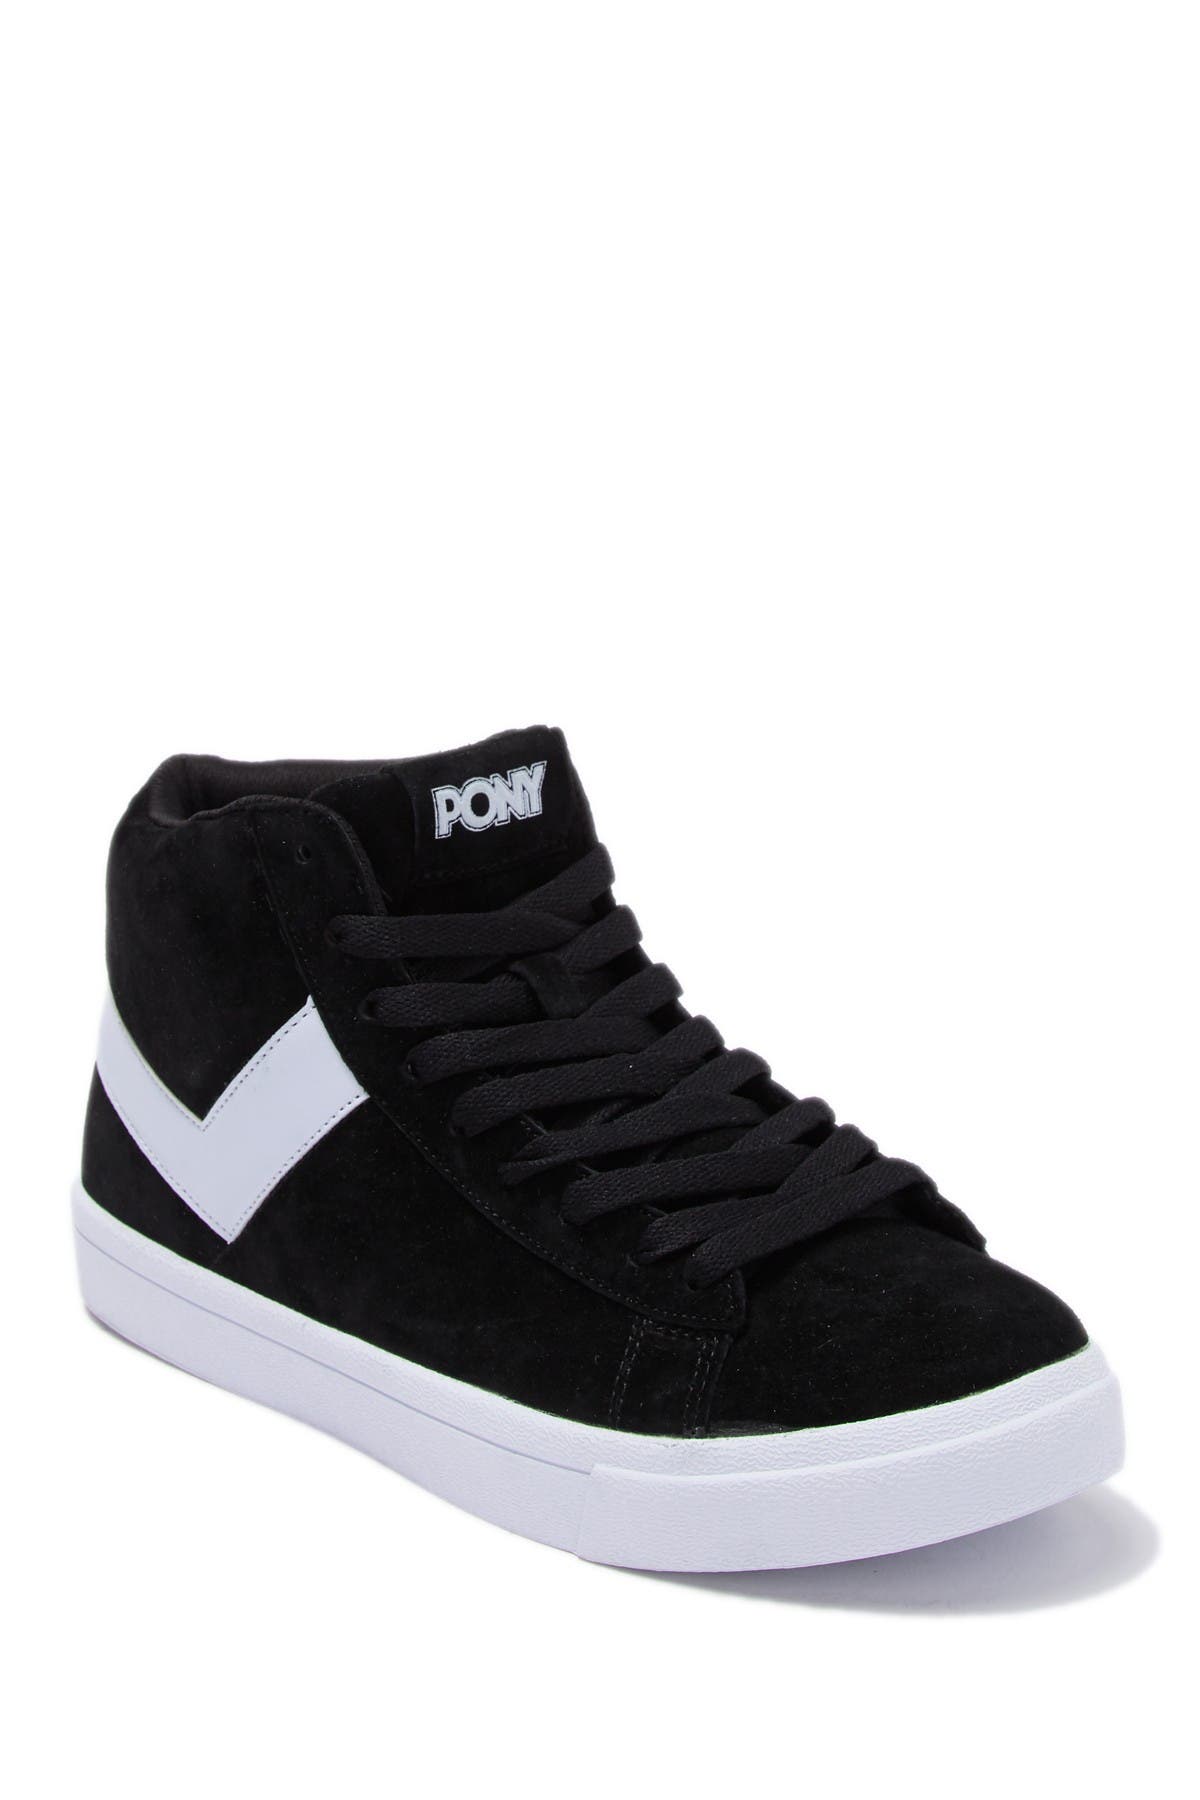 high top pony sneakers